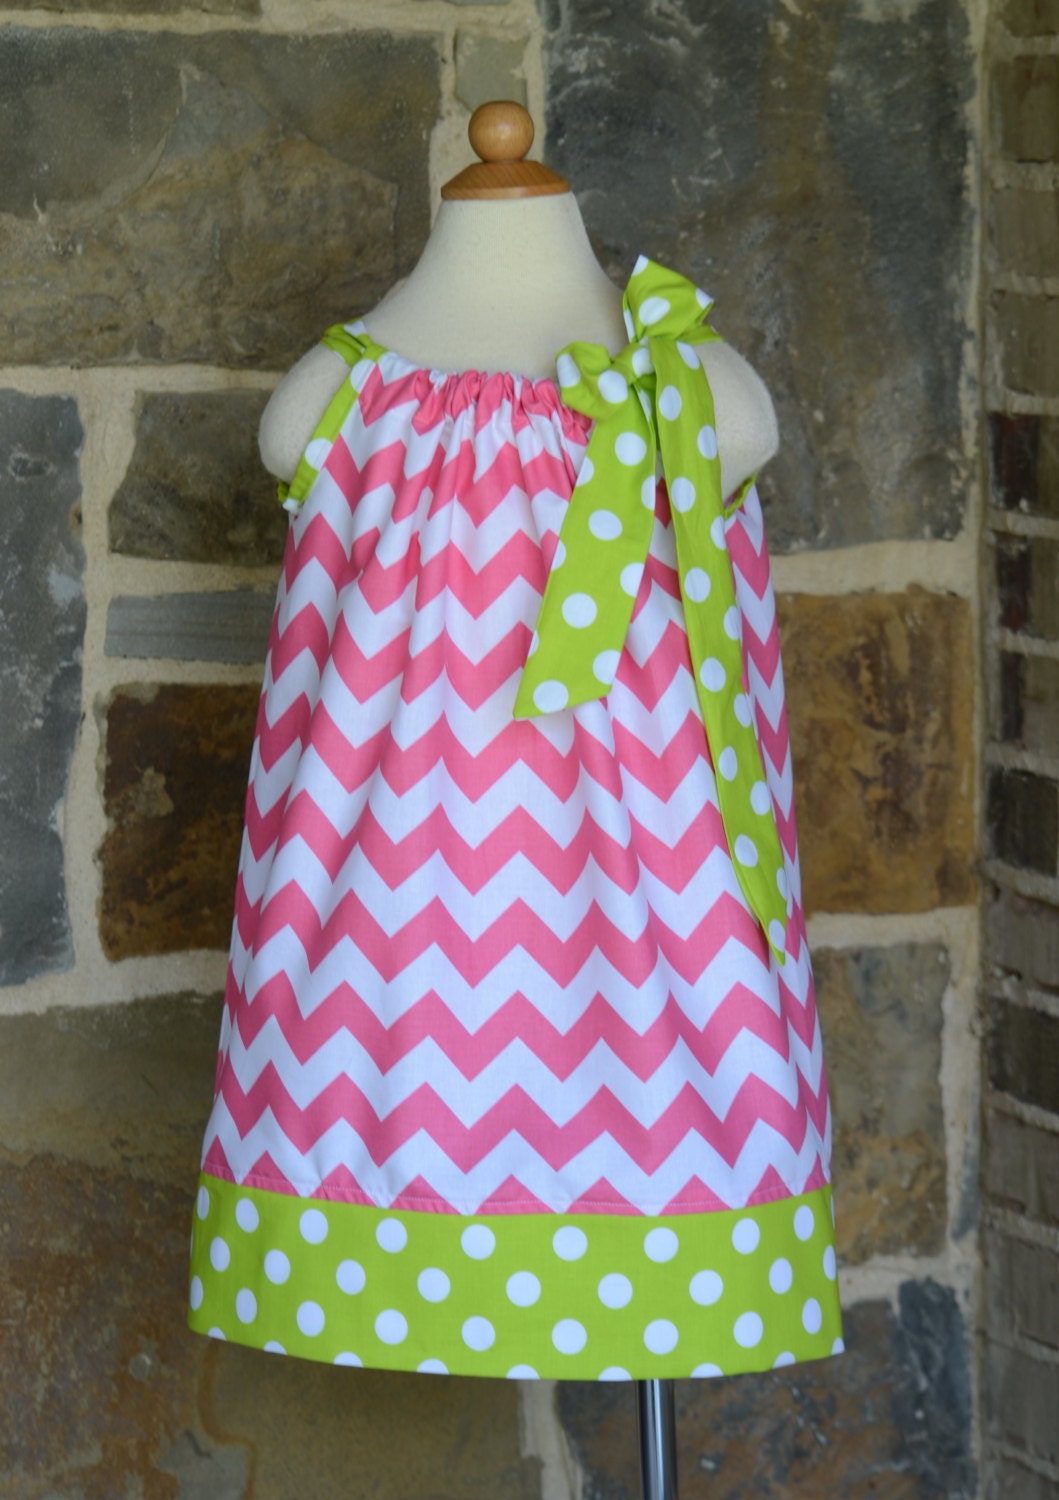 Hot Pink and Lime Green Polka Dot by AddysonGraceDesigns on Etsy